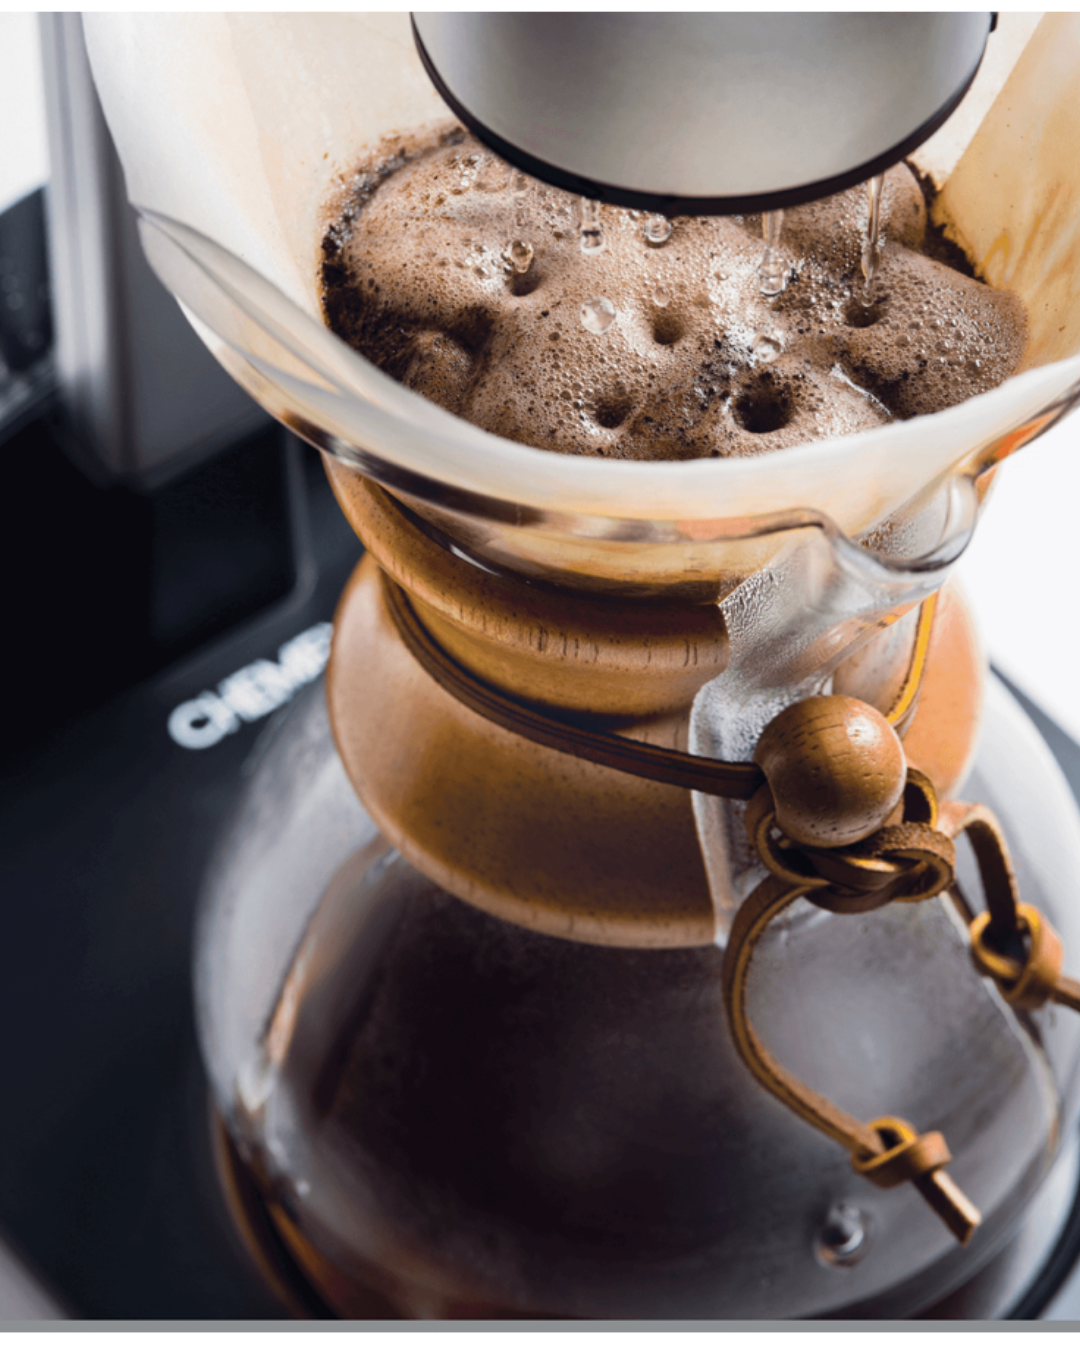 We made an automatic Chemex pour over machine. Let us know what